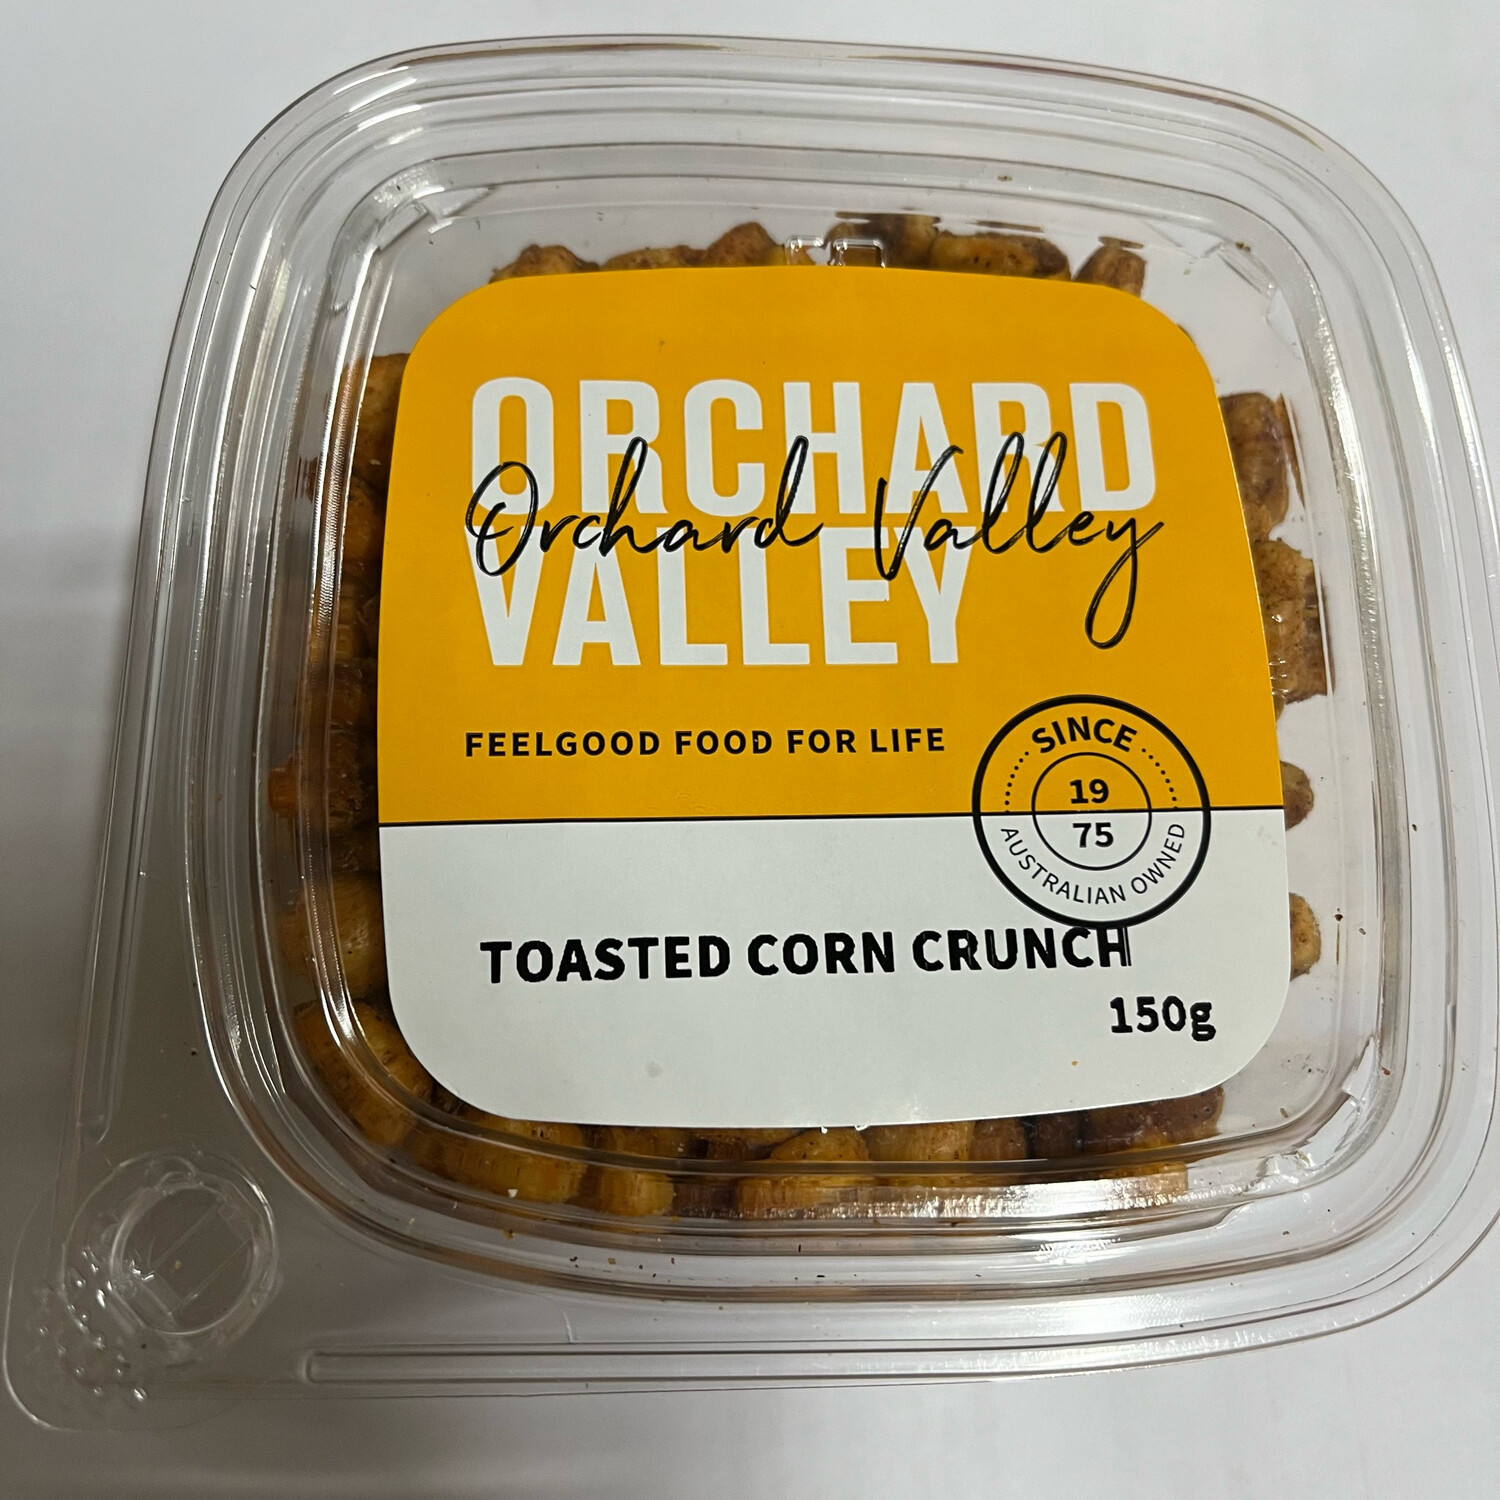 TOASTED CORN CRUNCH